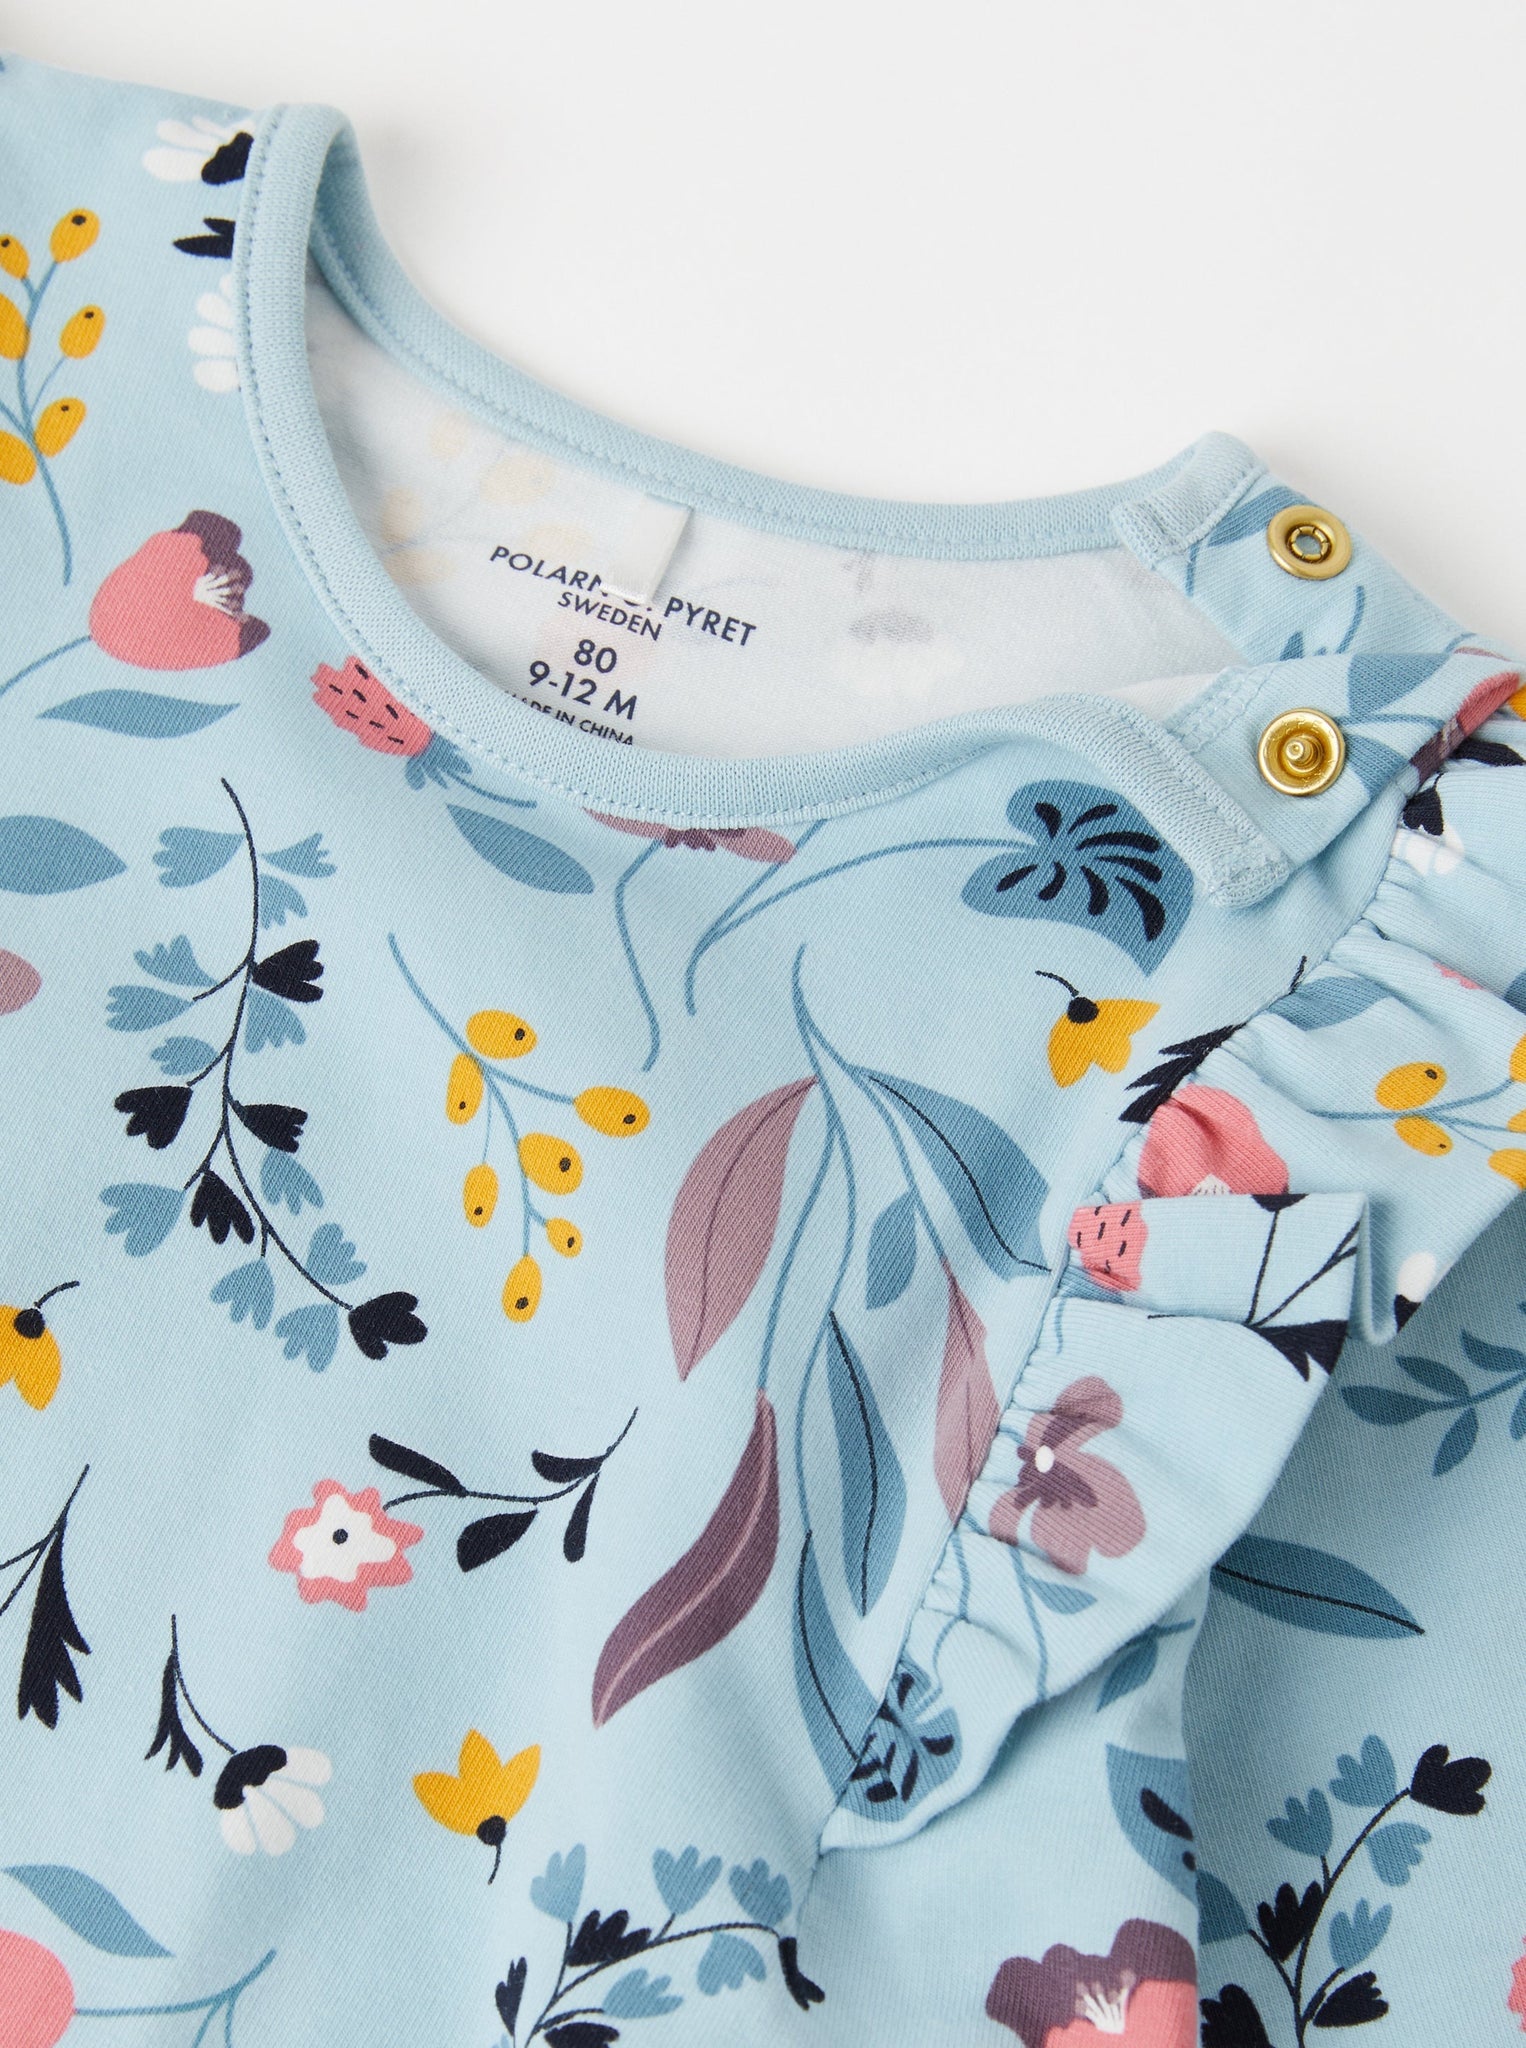 Blue Floral Wraparound Babygrow from the Polarn O. Pyret babywear collection. Nordic baby clothes made from sustainable sources.